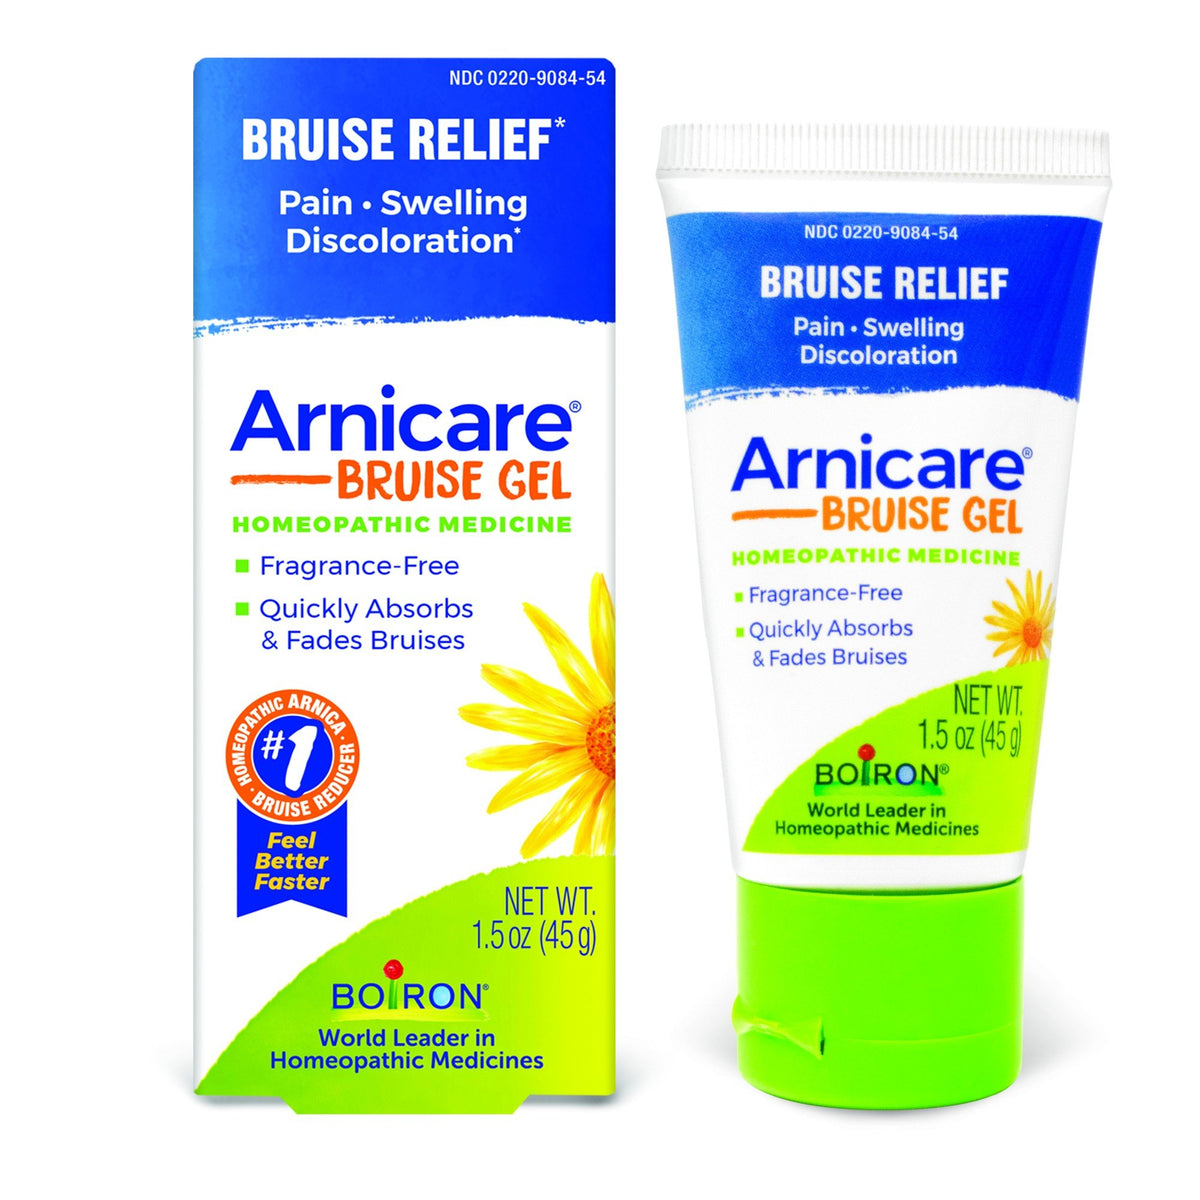 Boiron Arnicare Bruise Gel Homeopathic Medicine For Bruise Relief 1.5 oz Gel